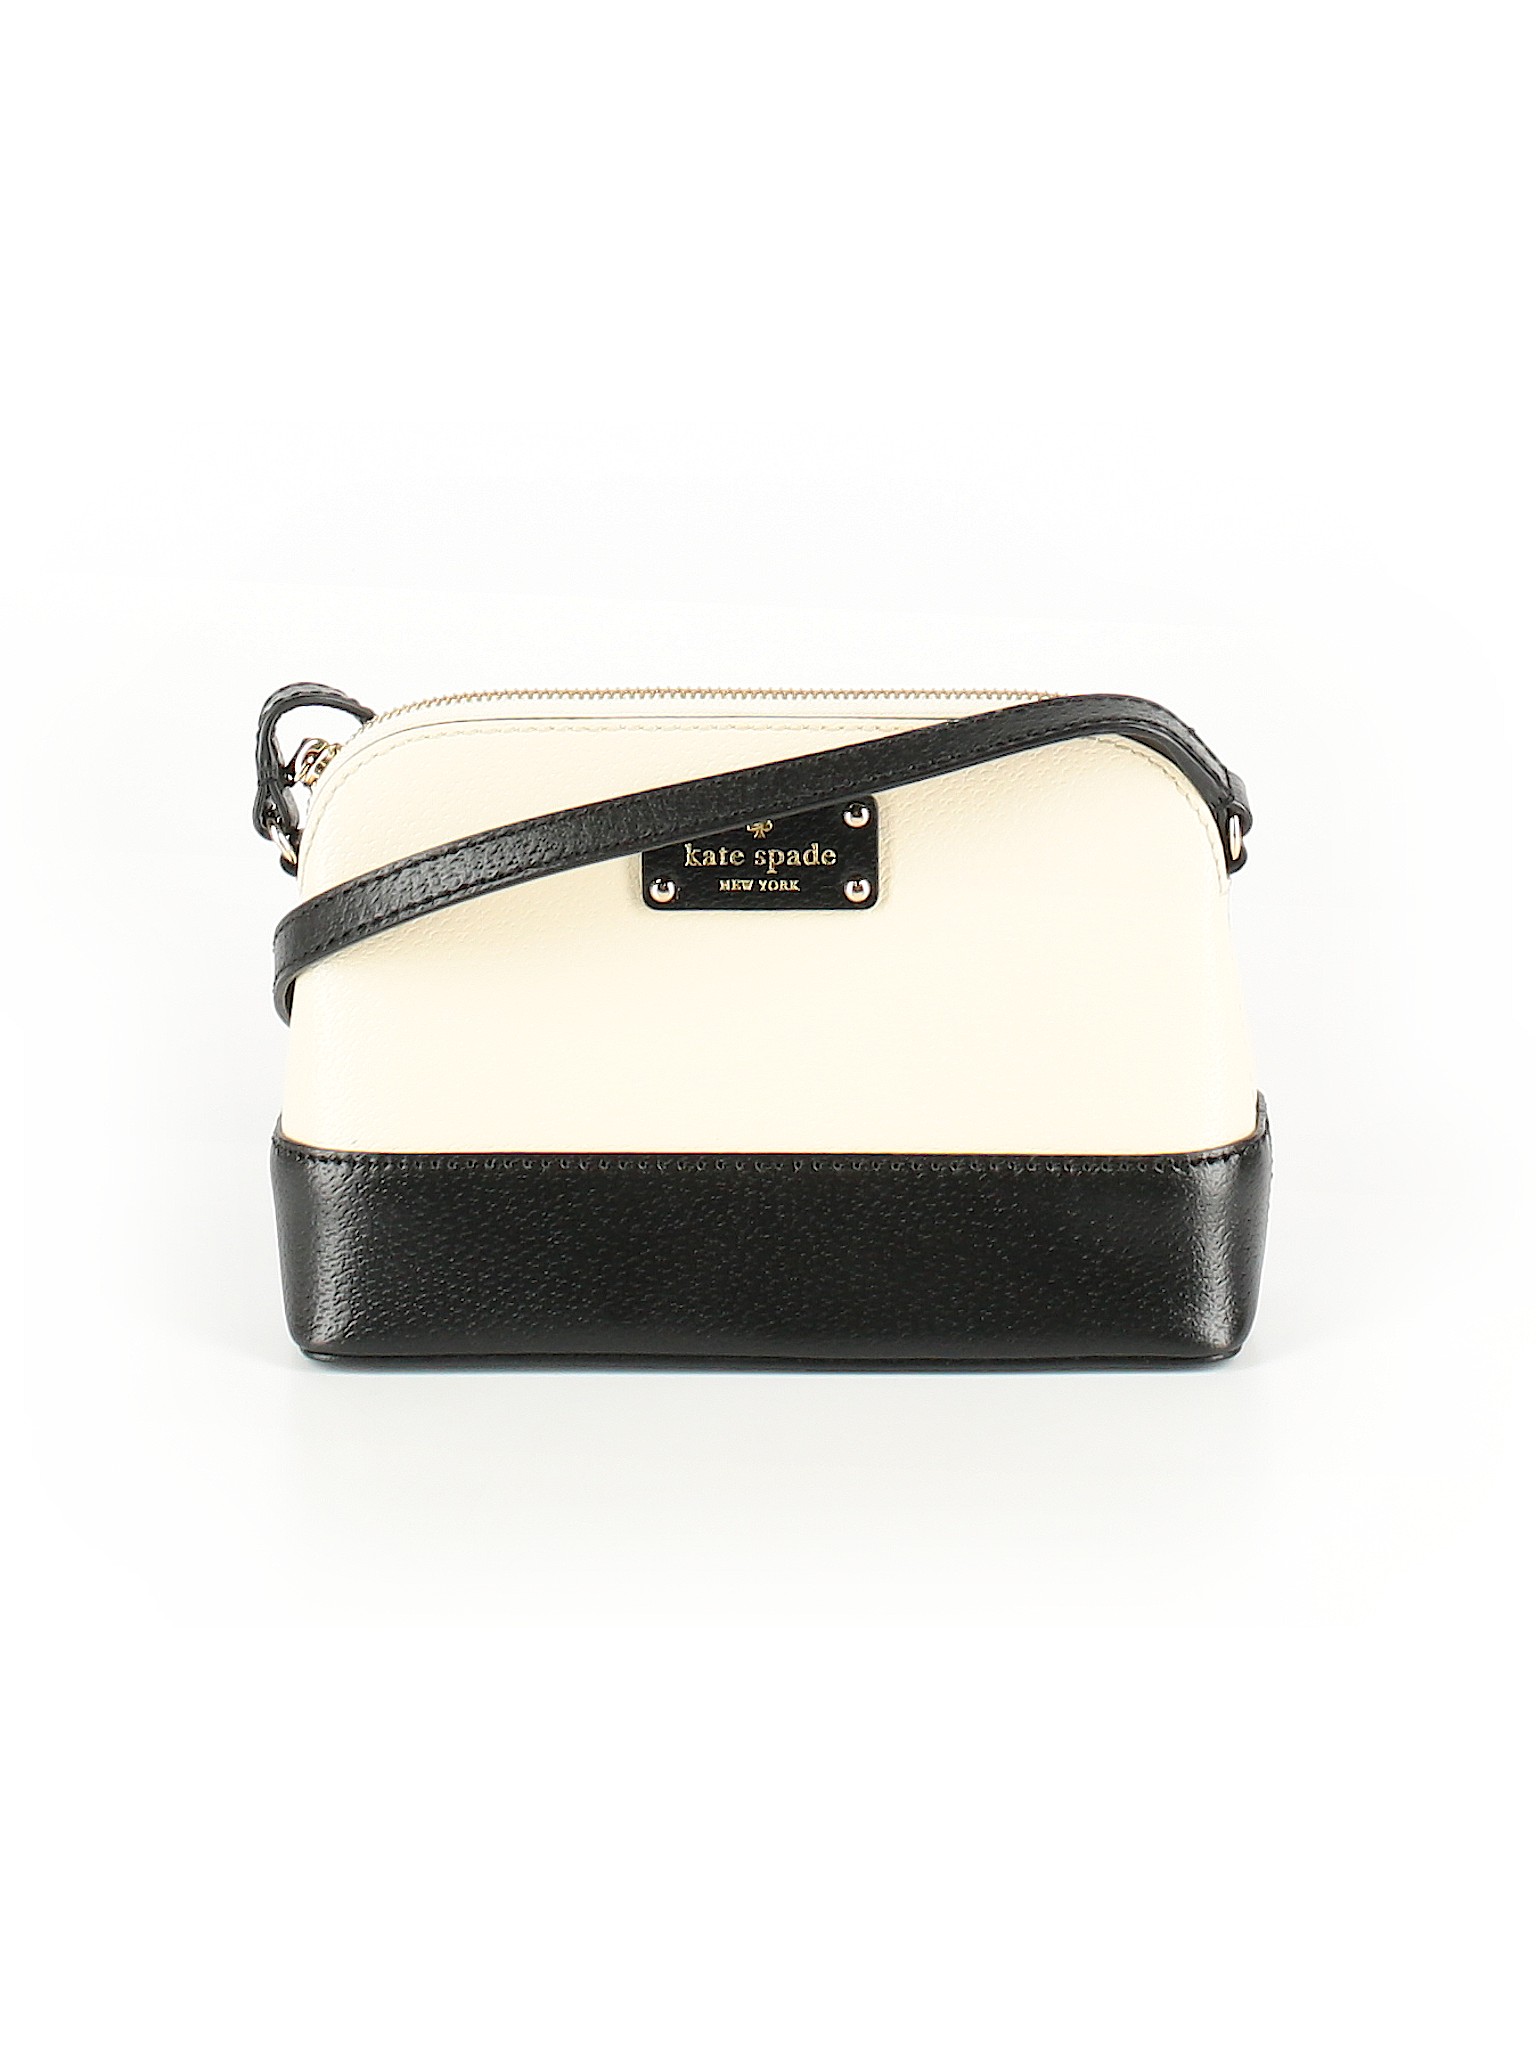 Kate Spade New York Color Block Solid Ivory Leather Crossbody Bag One